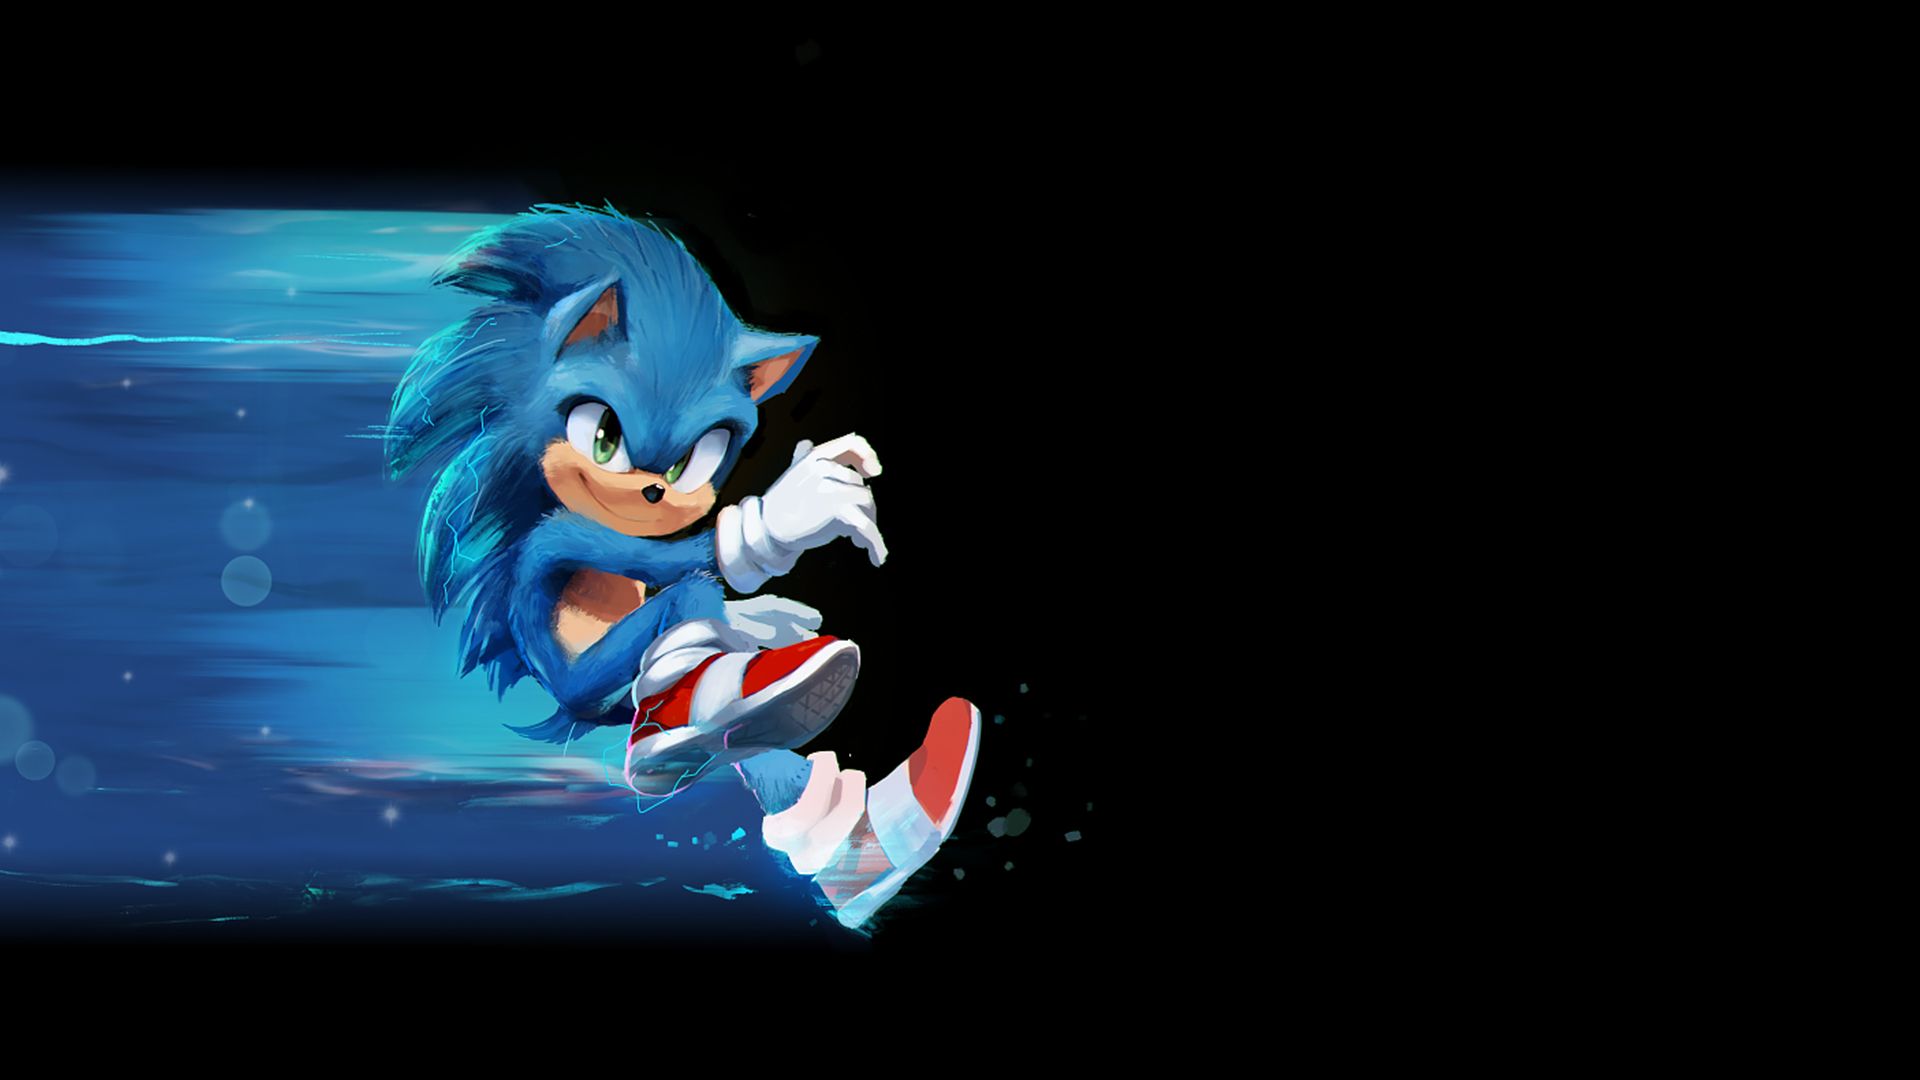 Sonic Movie 3 - Sonic the Hedgehog Animated Wallpaper Download